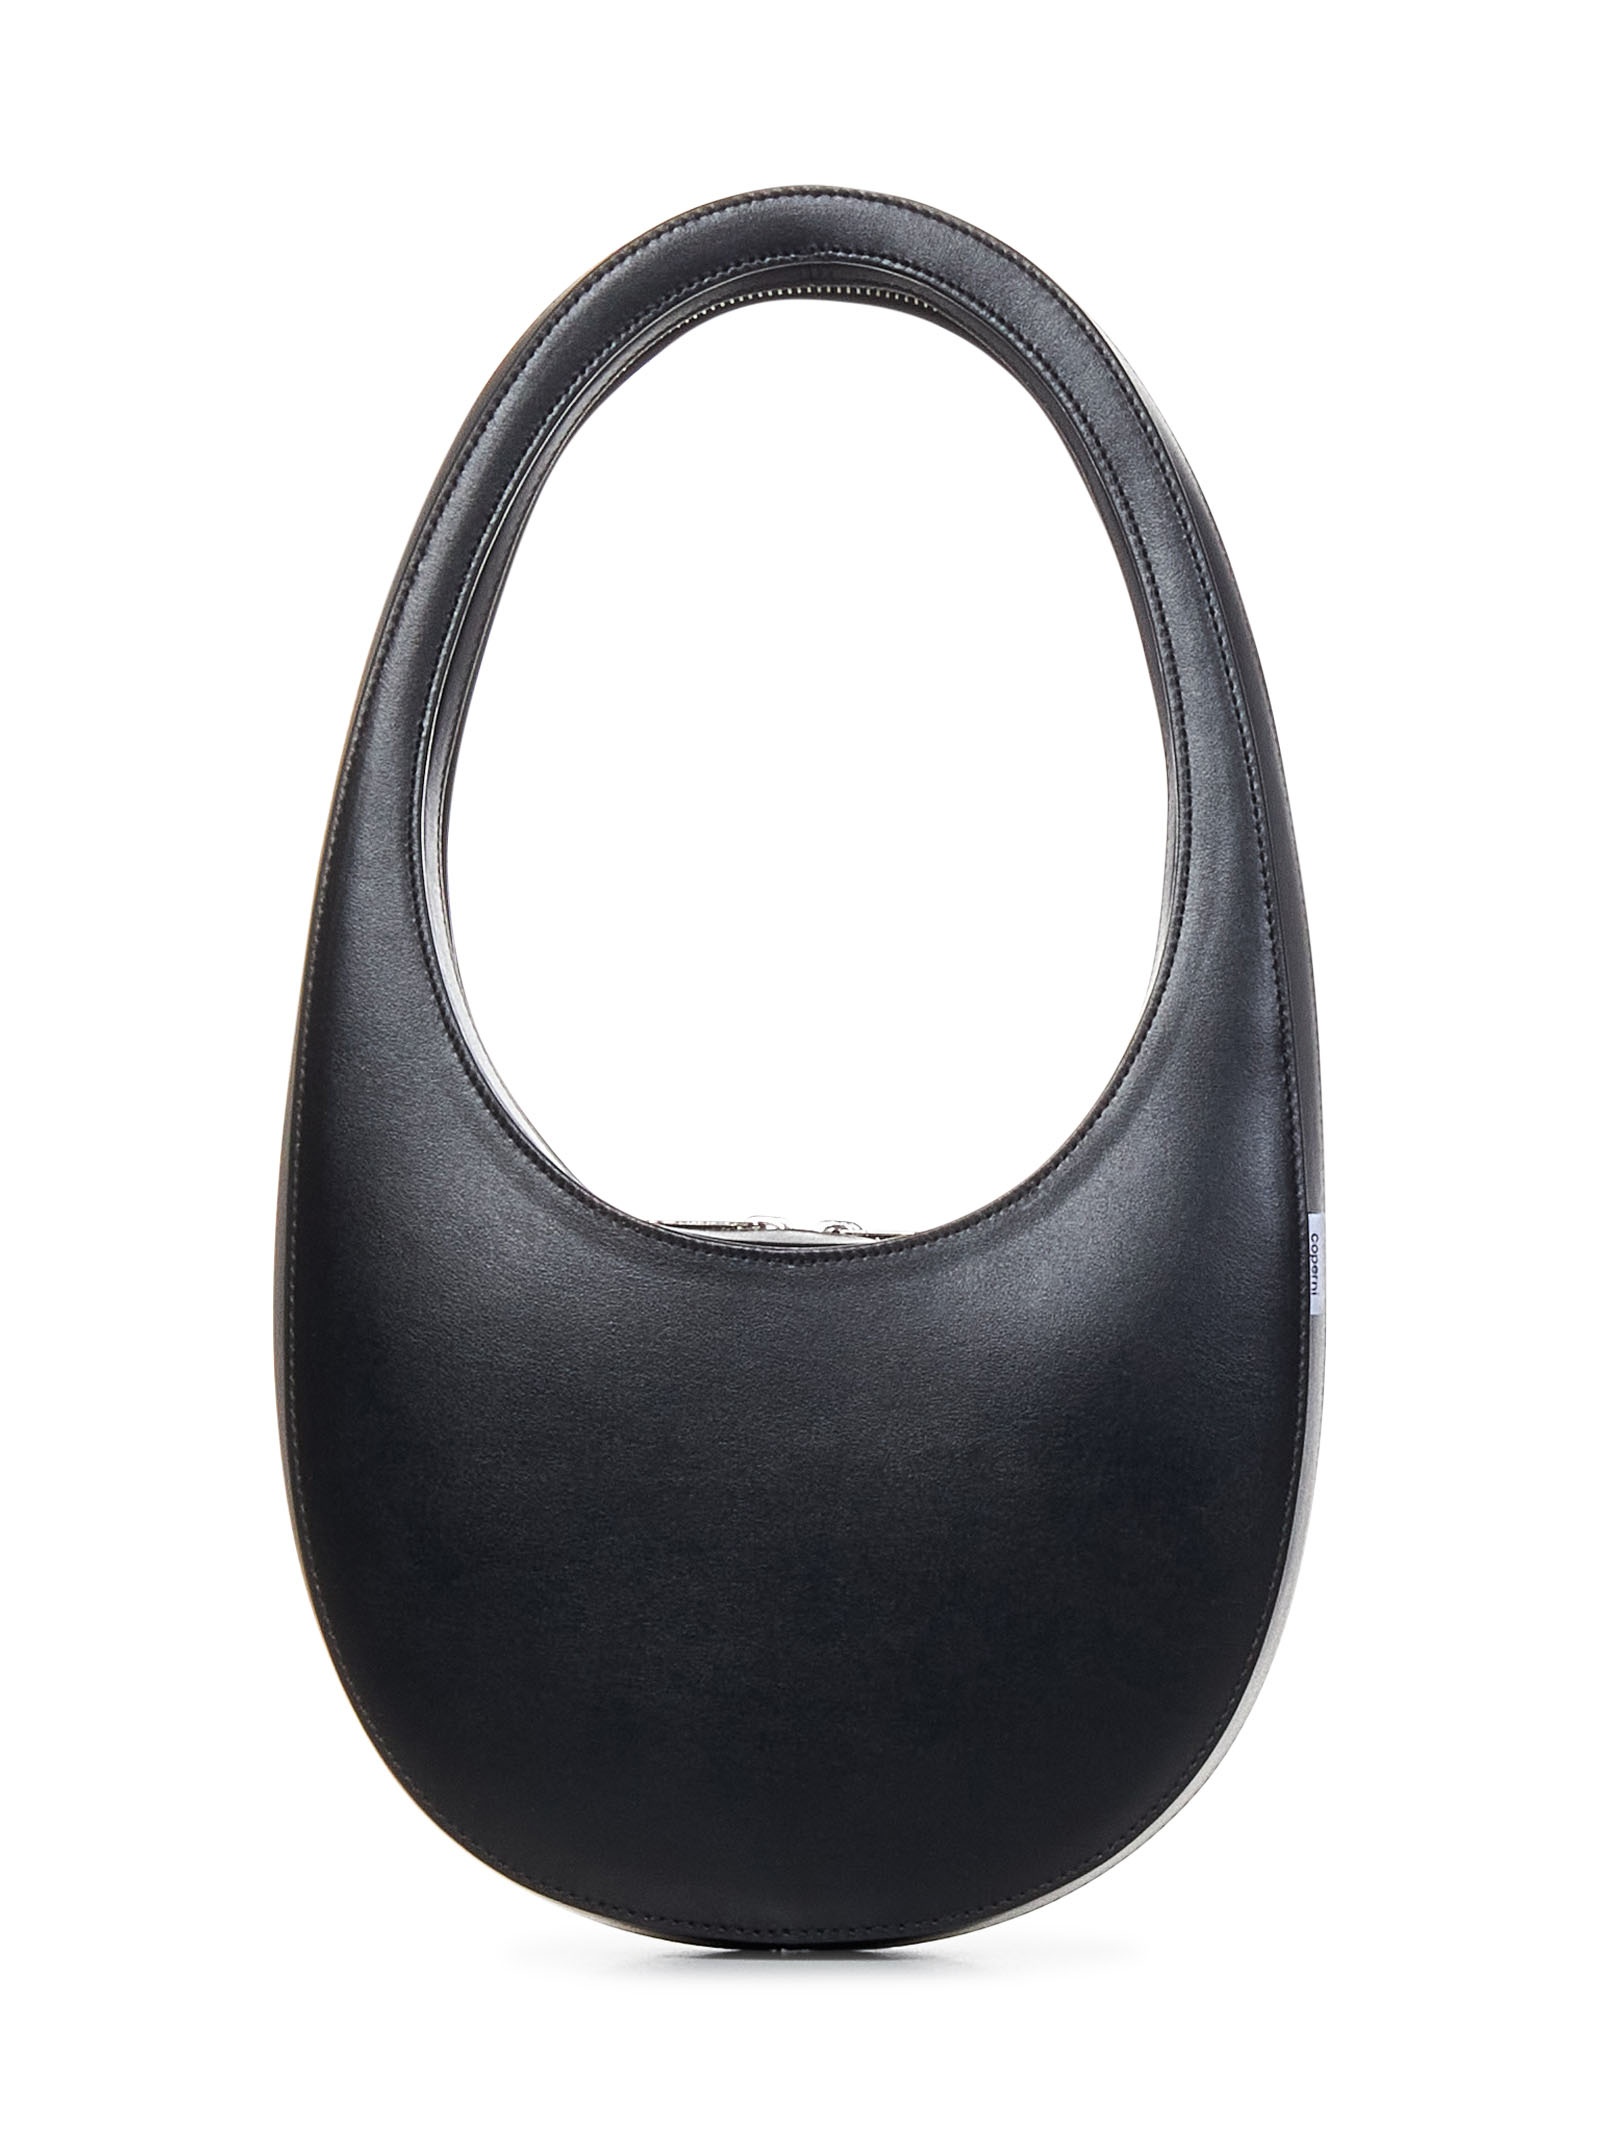 Oval handbag in black leather with silver logo print on the front. - 3